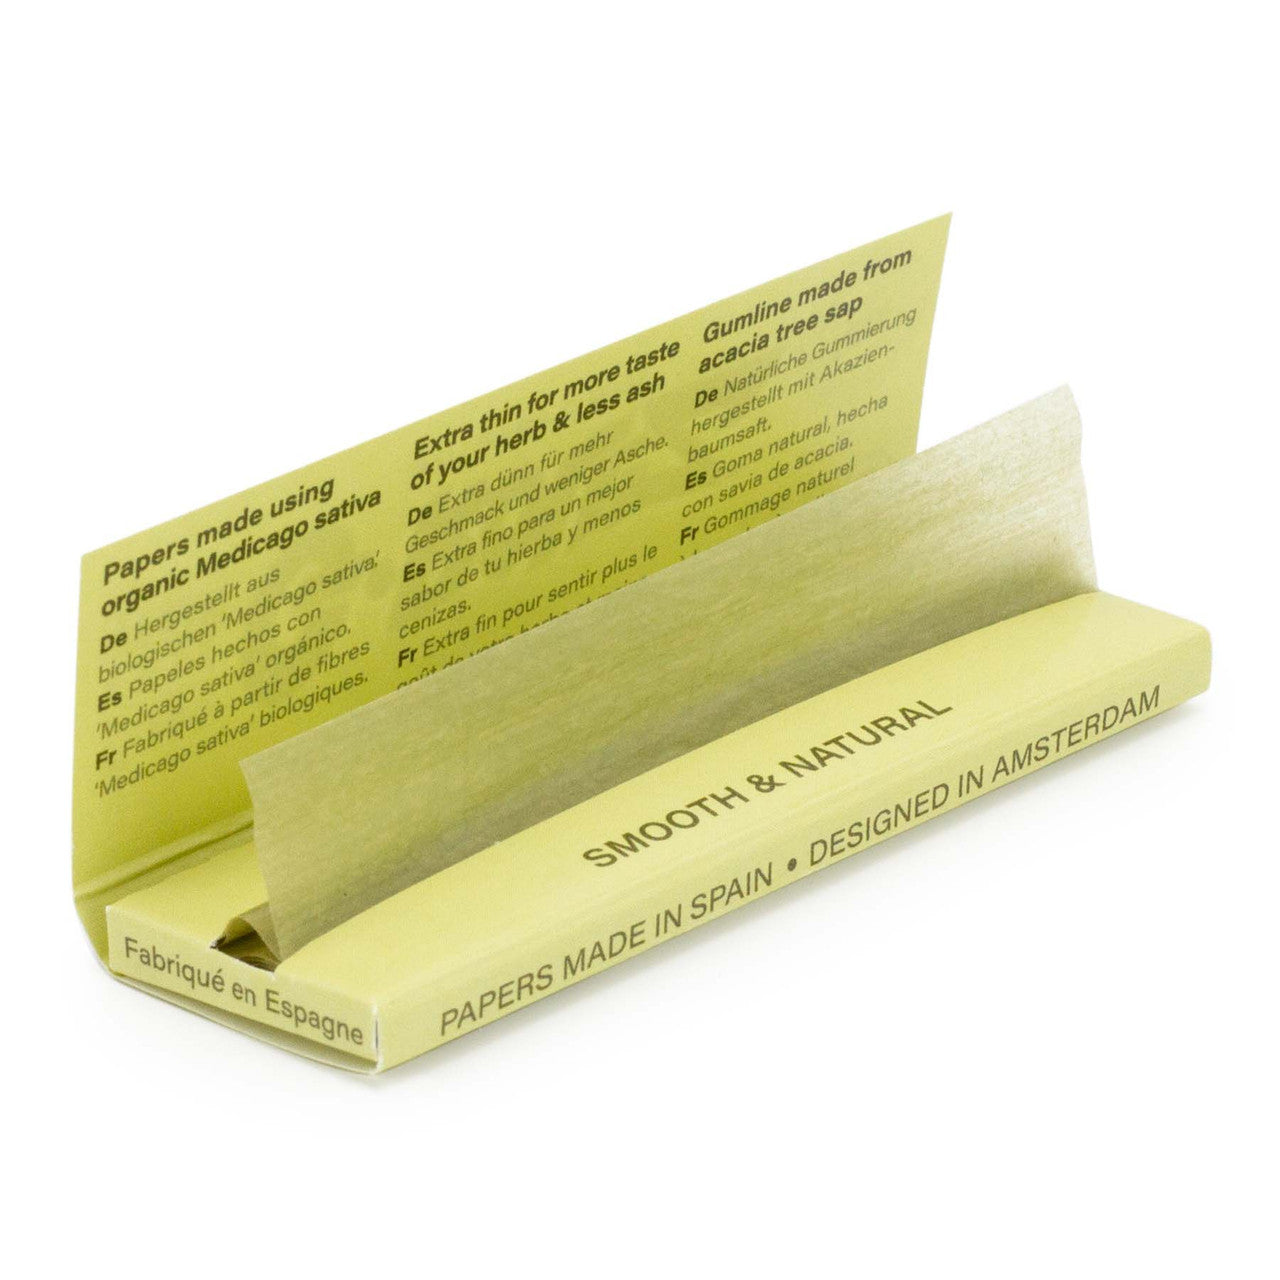 G Rollz Papers - Organic Medicago Sativa Extra Thin (1 1/4 Size)